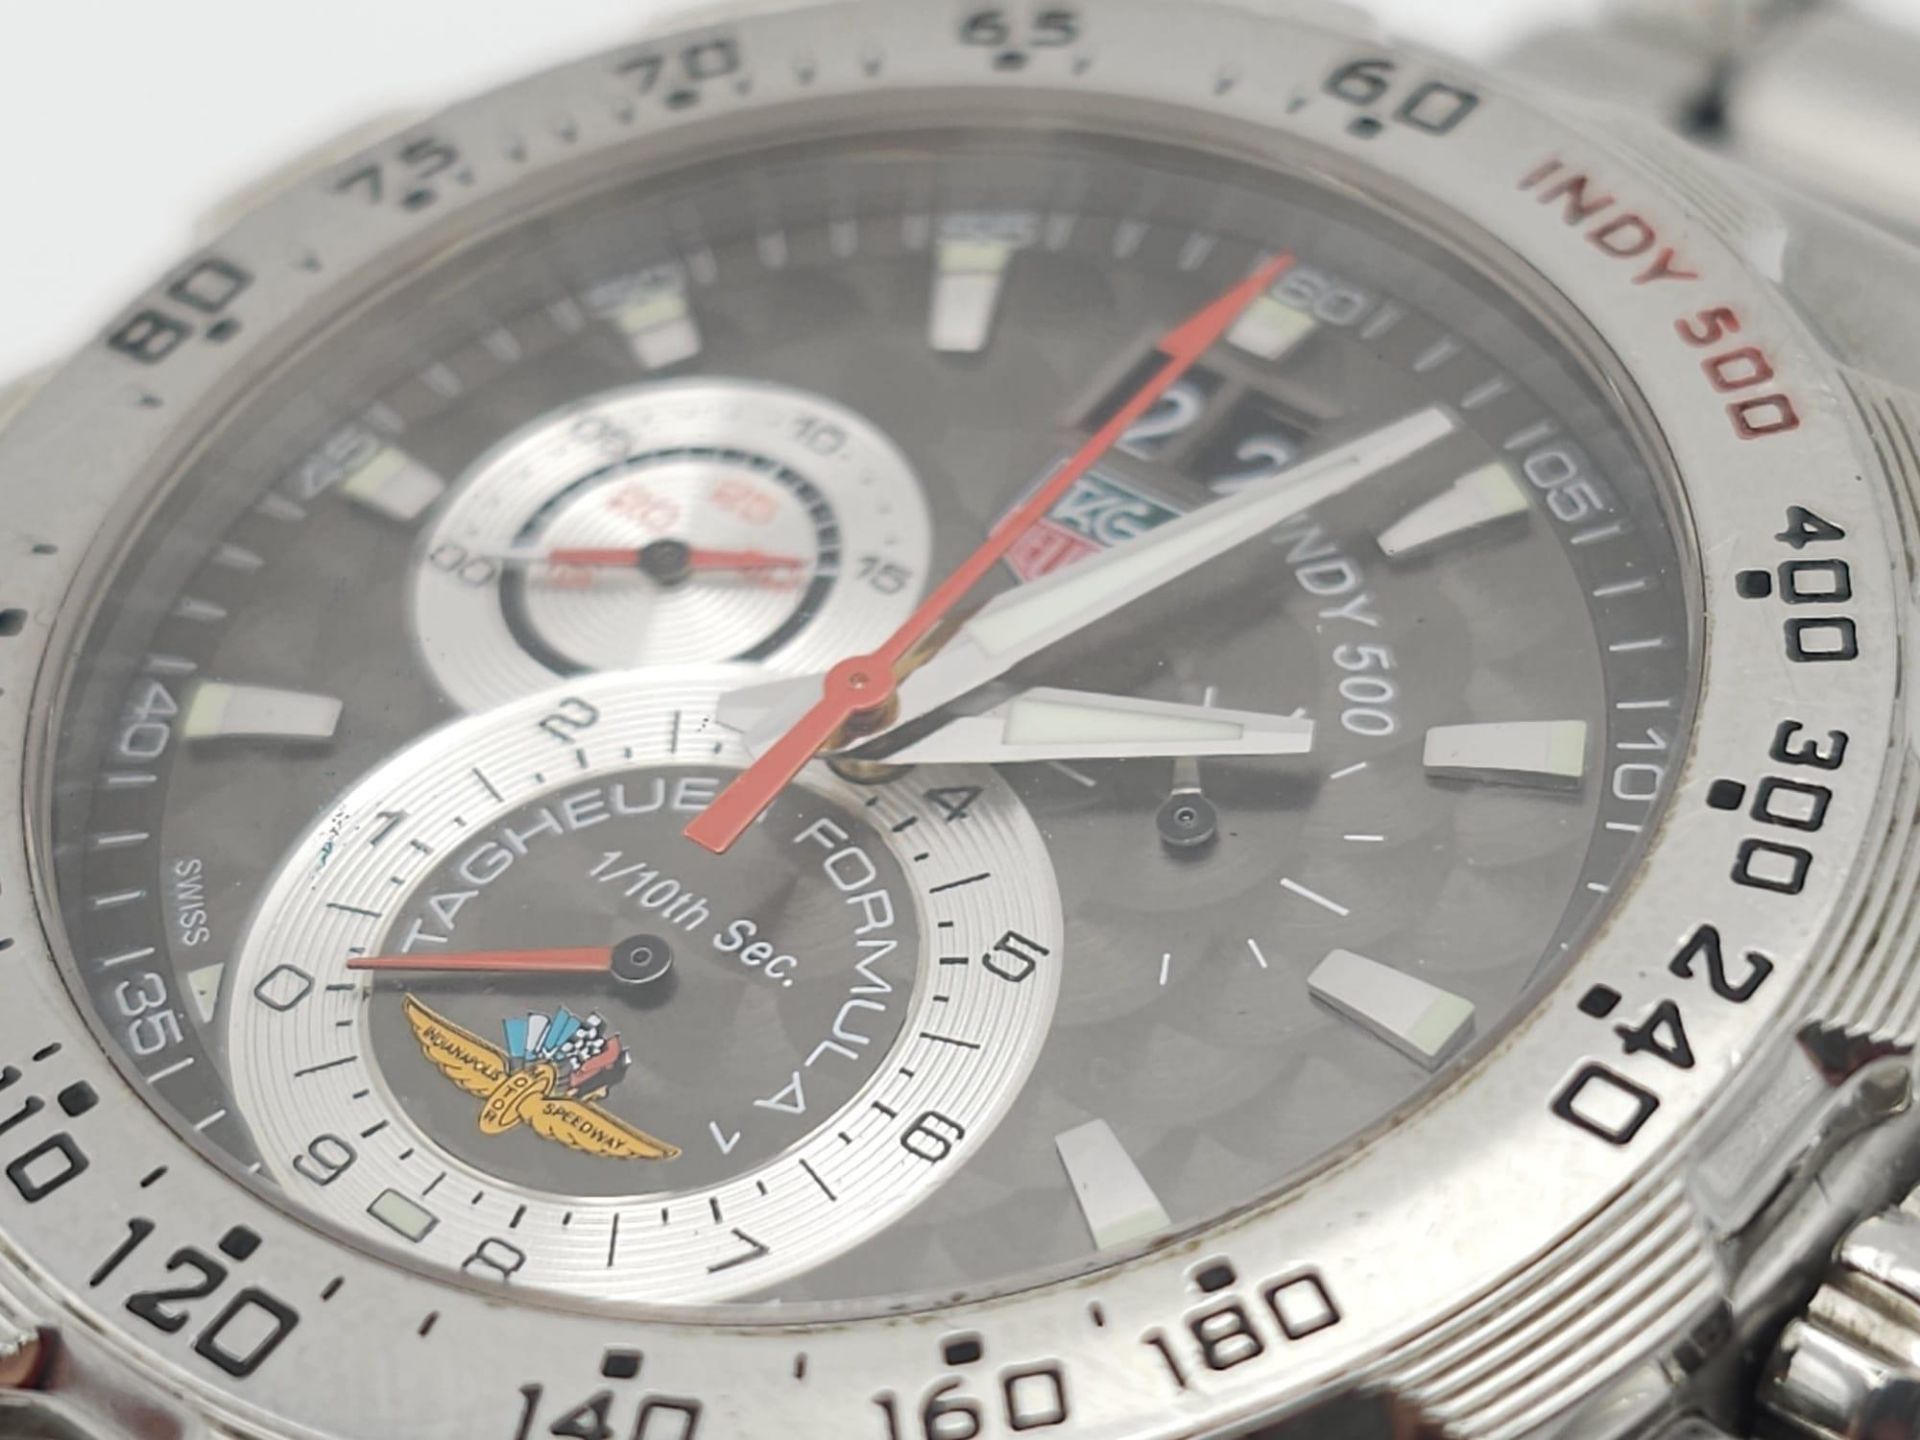 A TAG HEUER "FORMULA 1" INDY 500 QUARTZ GENTS WATCH IN STAINLESS STEEL . 45mm A REALLY GOOD - Image 4 of 11